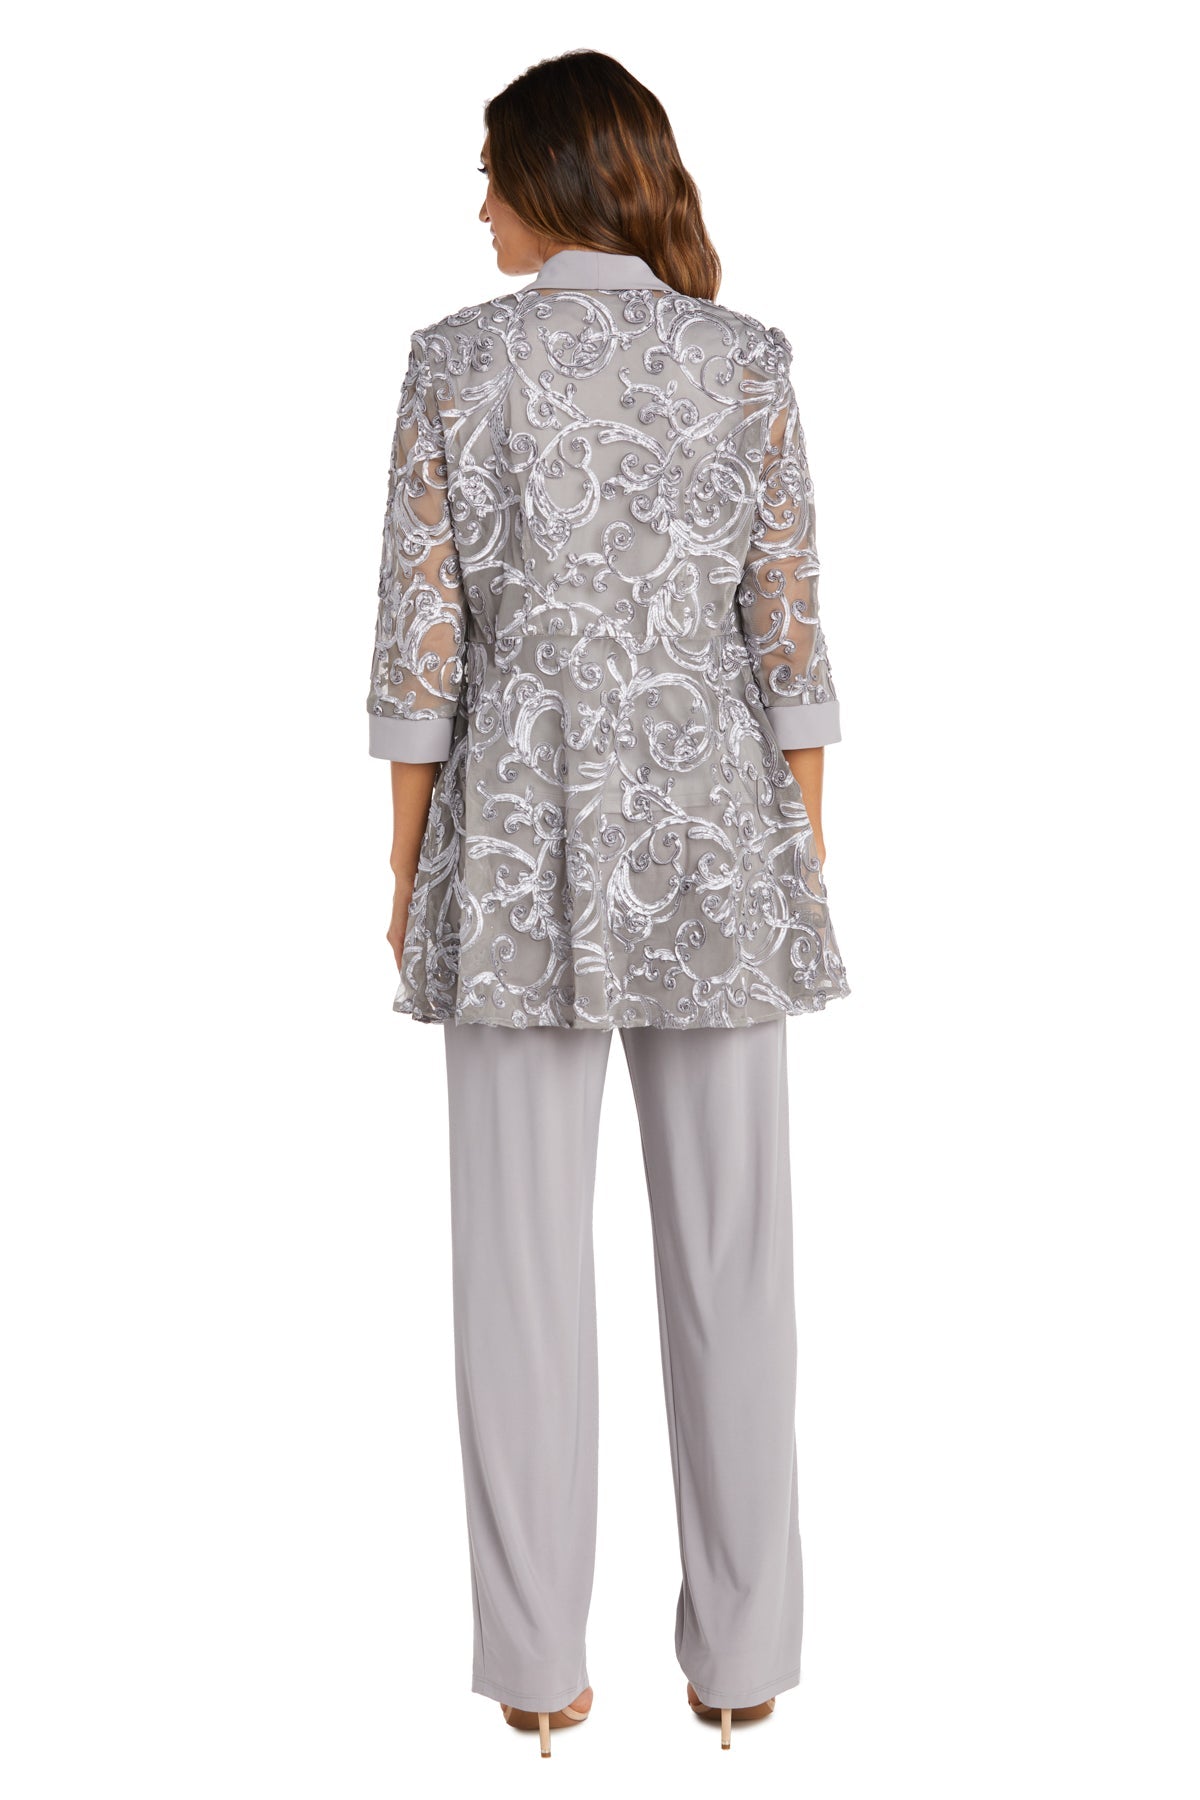 Petite Women's Crinkle Duster Pant Set - Mother of the Bride Pant suit